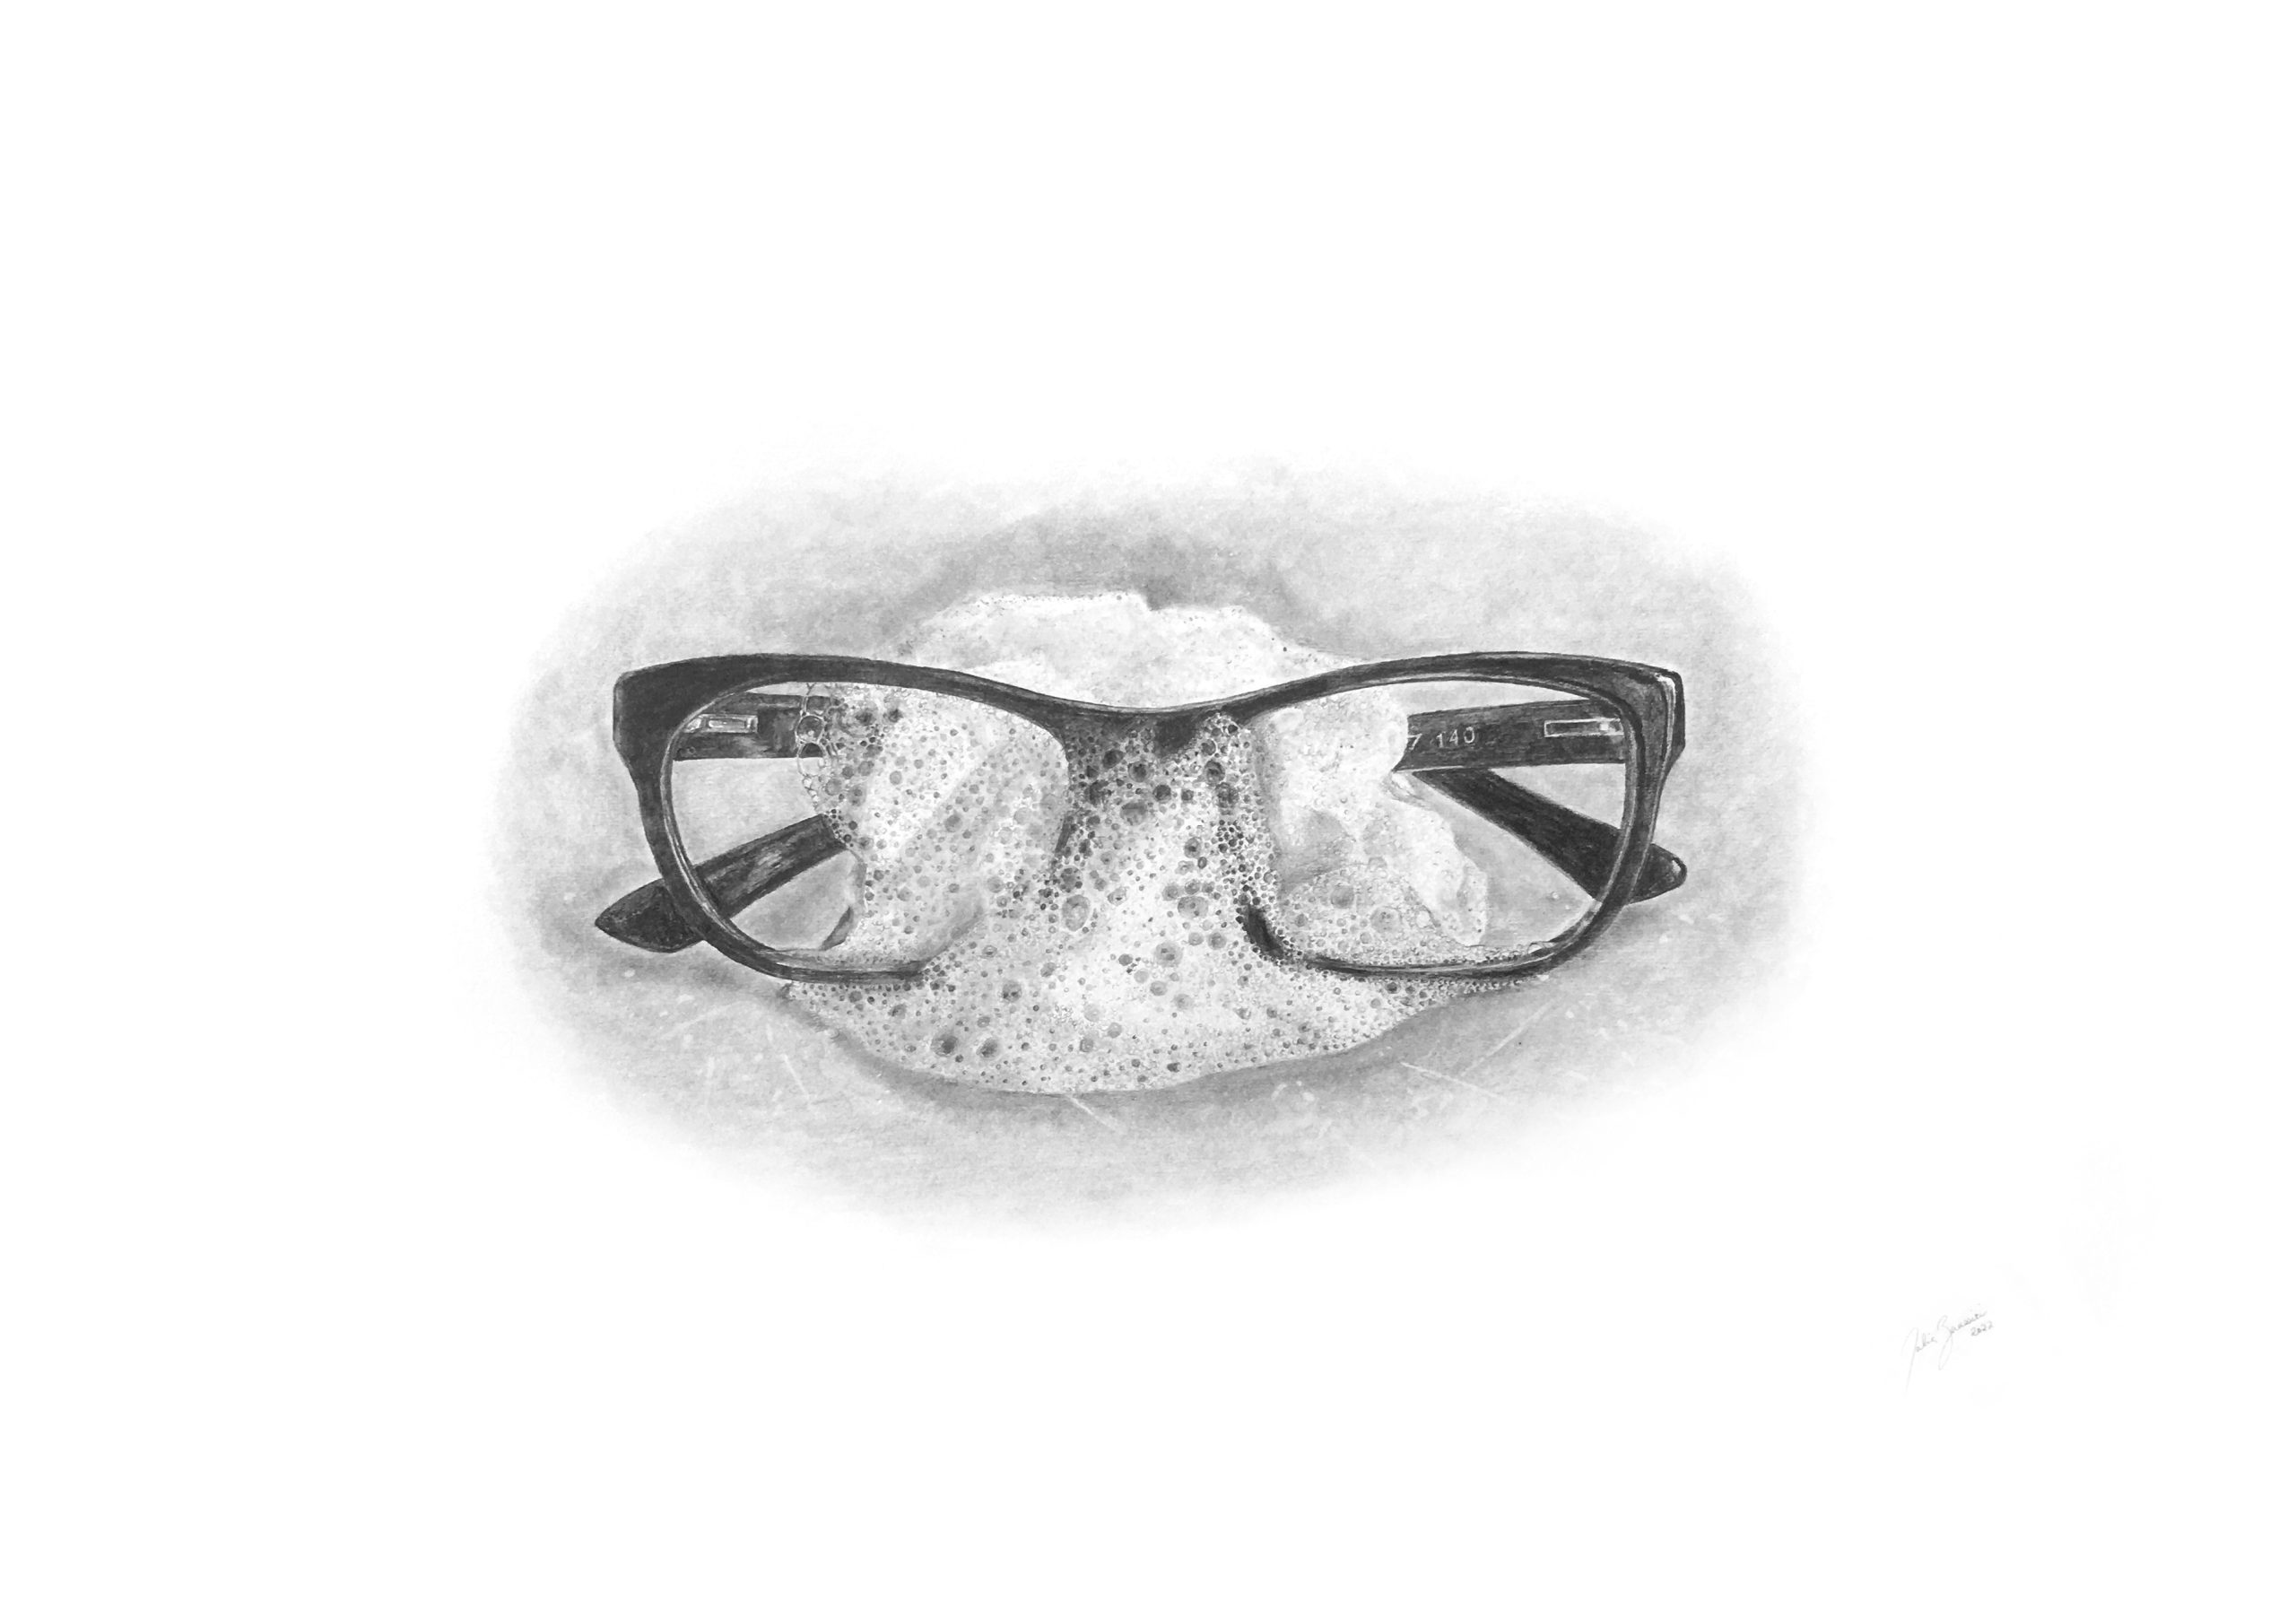 My Glasses, 2022, Graphite on Paper, 35 x 50 cm. Courtesy of the Artist